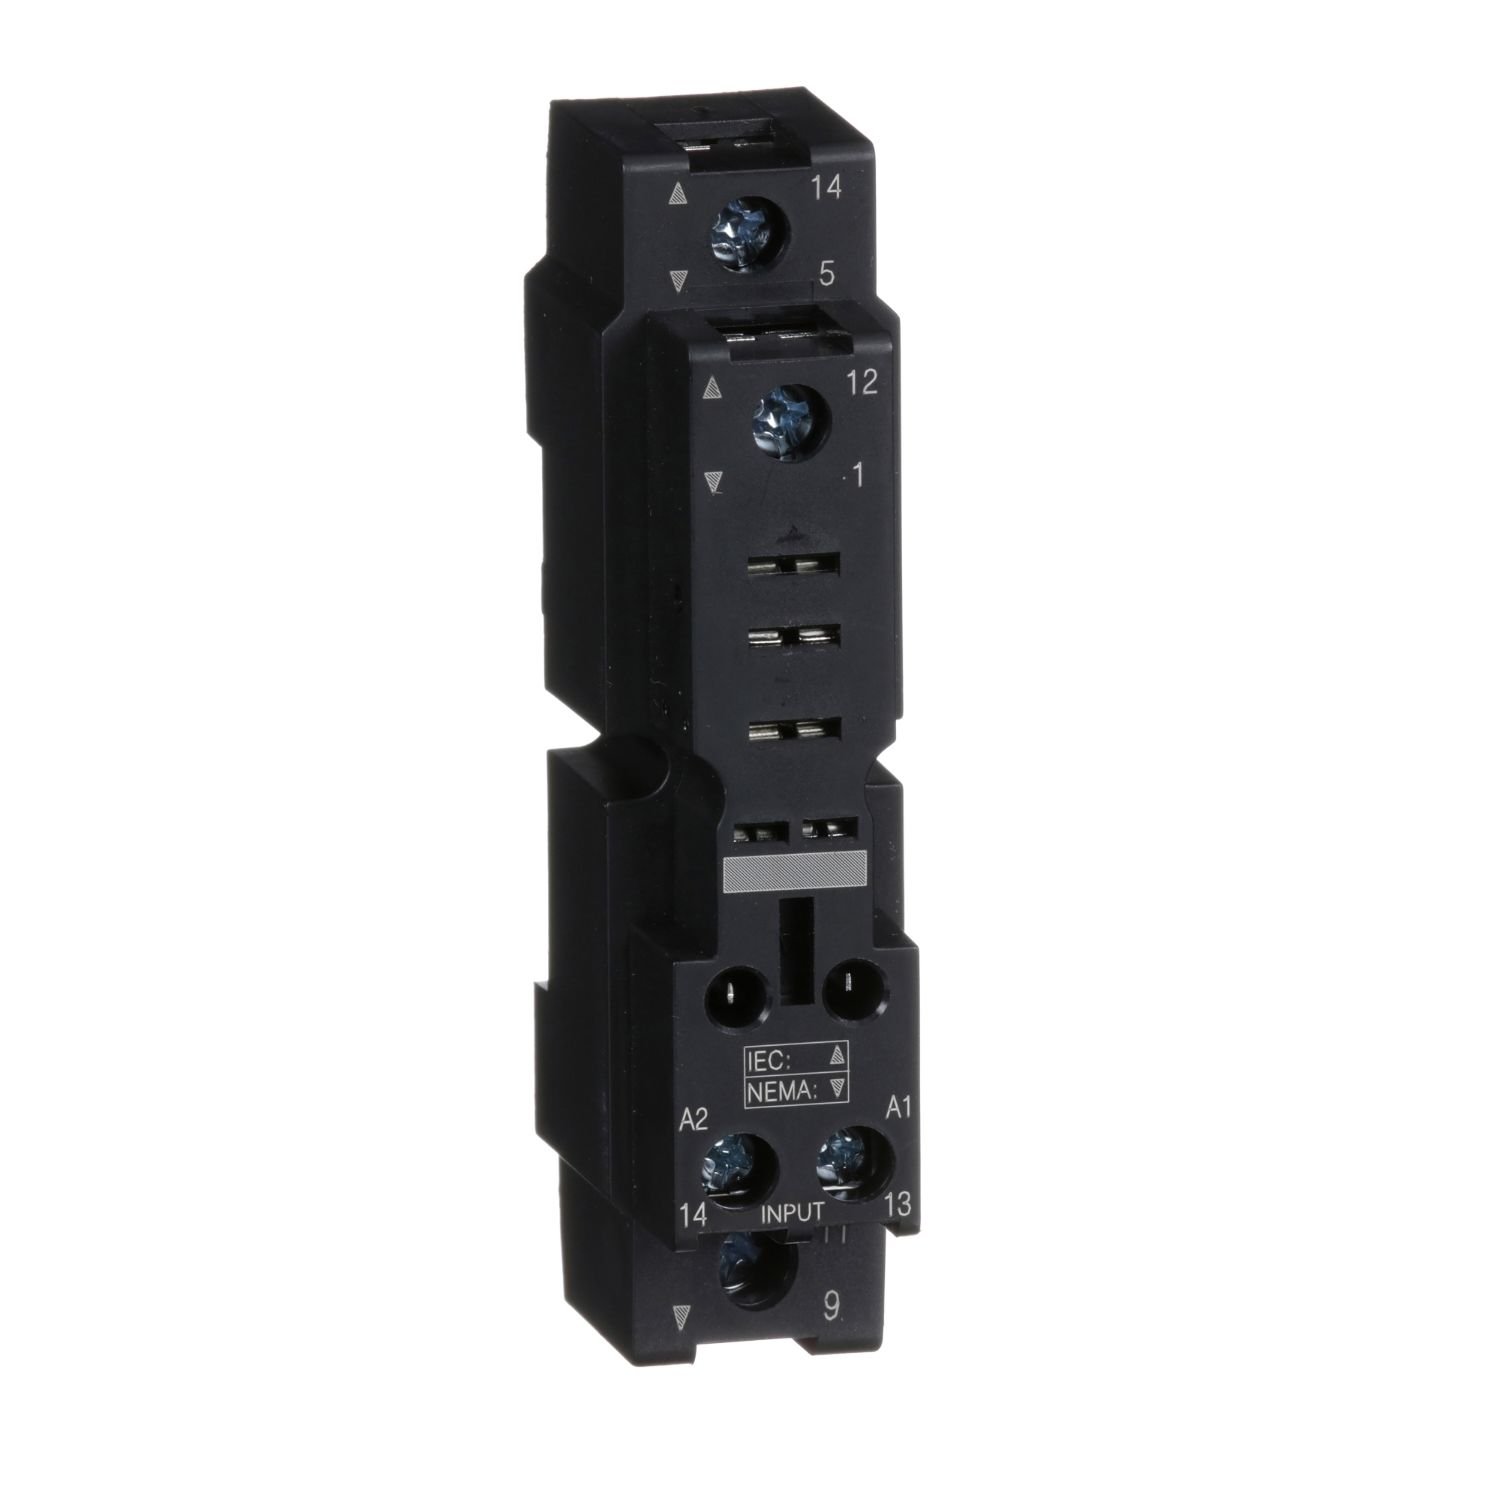 RPZF1 Socket, Harmony, for RPM1 power relays, 16A screw clamp terminals, mixed contact